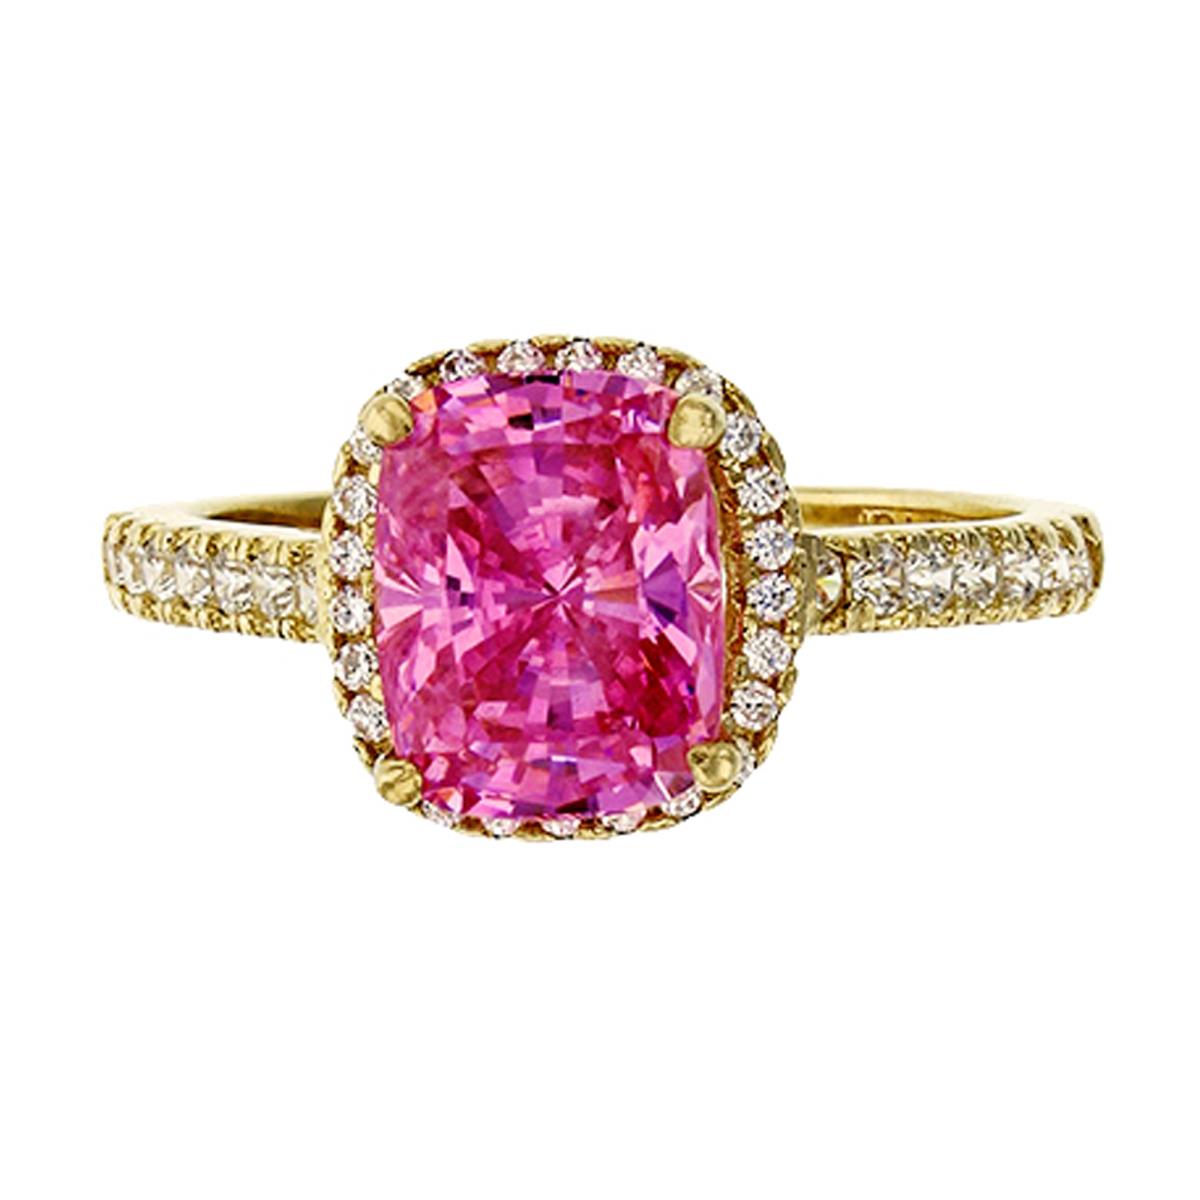 10K Yellow Gold Micropave 9x7mm Pink Radiant Cushion CZ Engagement Ring